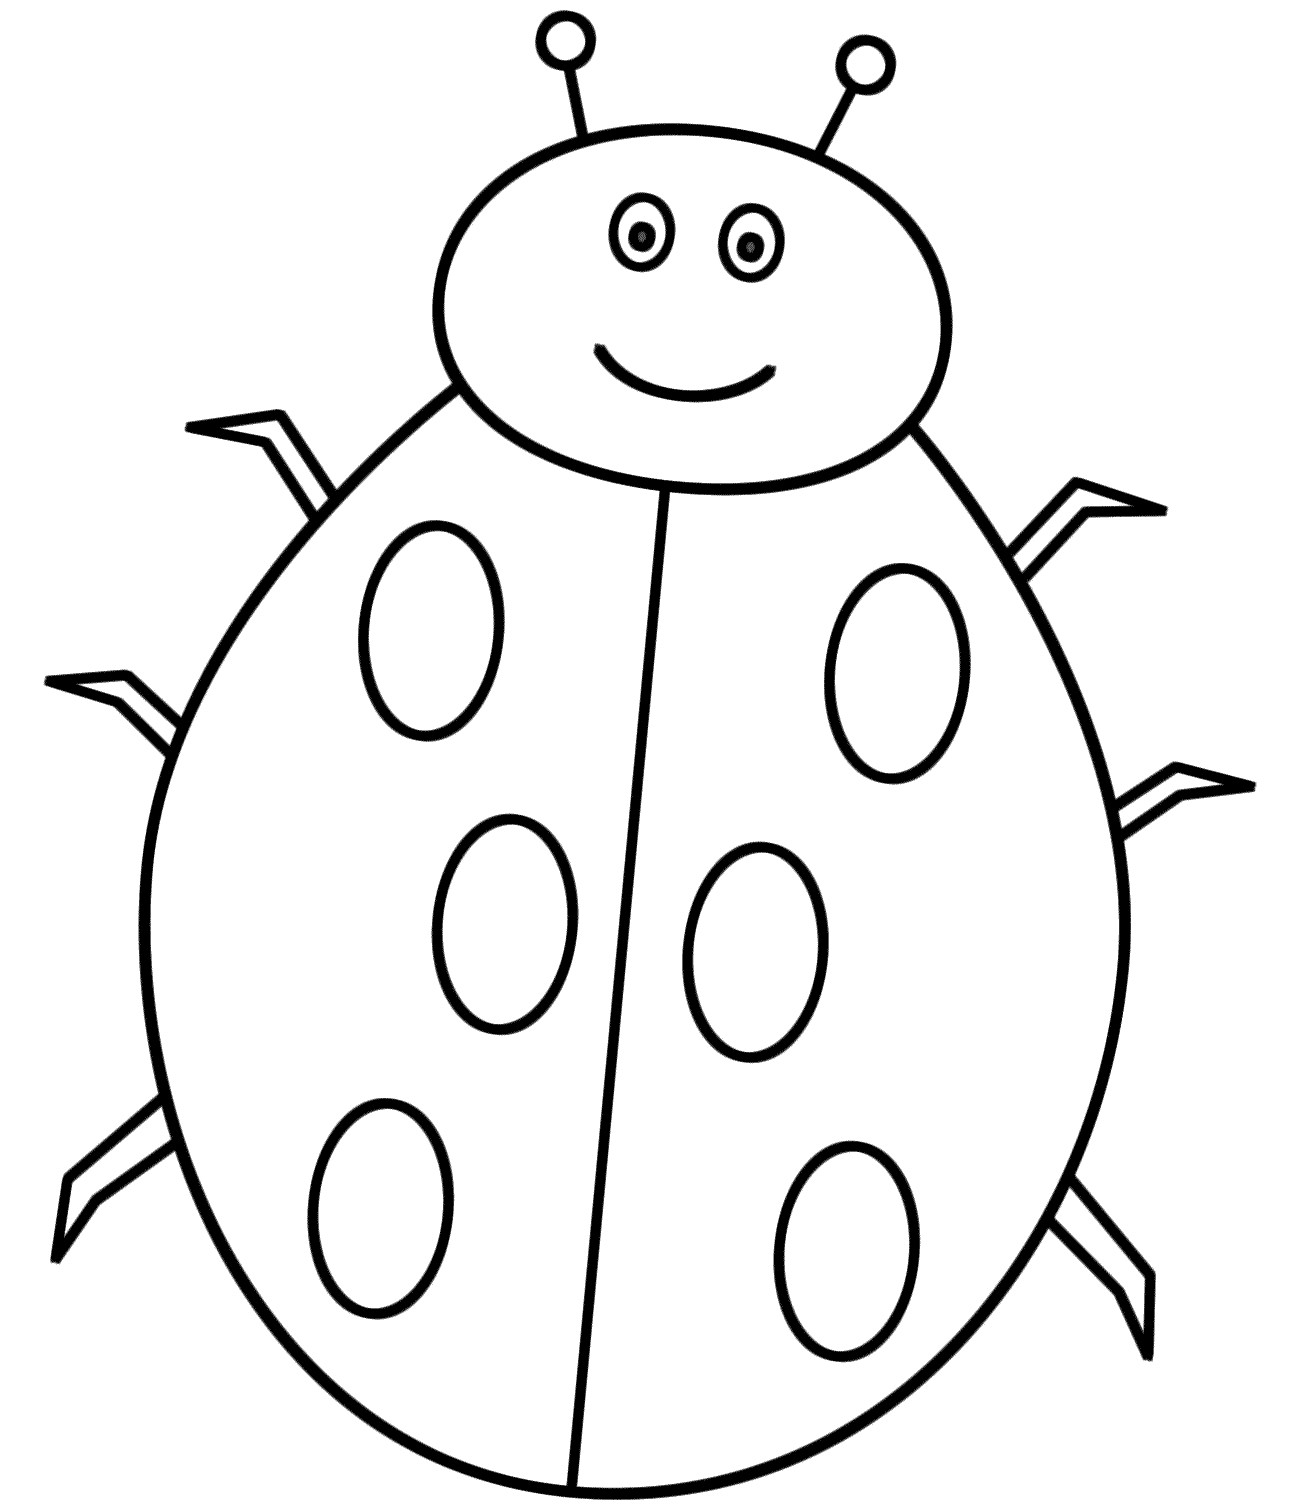 free-printable-ladybug-coloring-pages-at-getcolorings-free-printable-colorings-pages-to